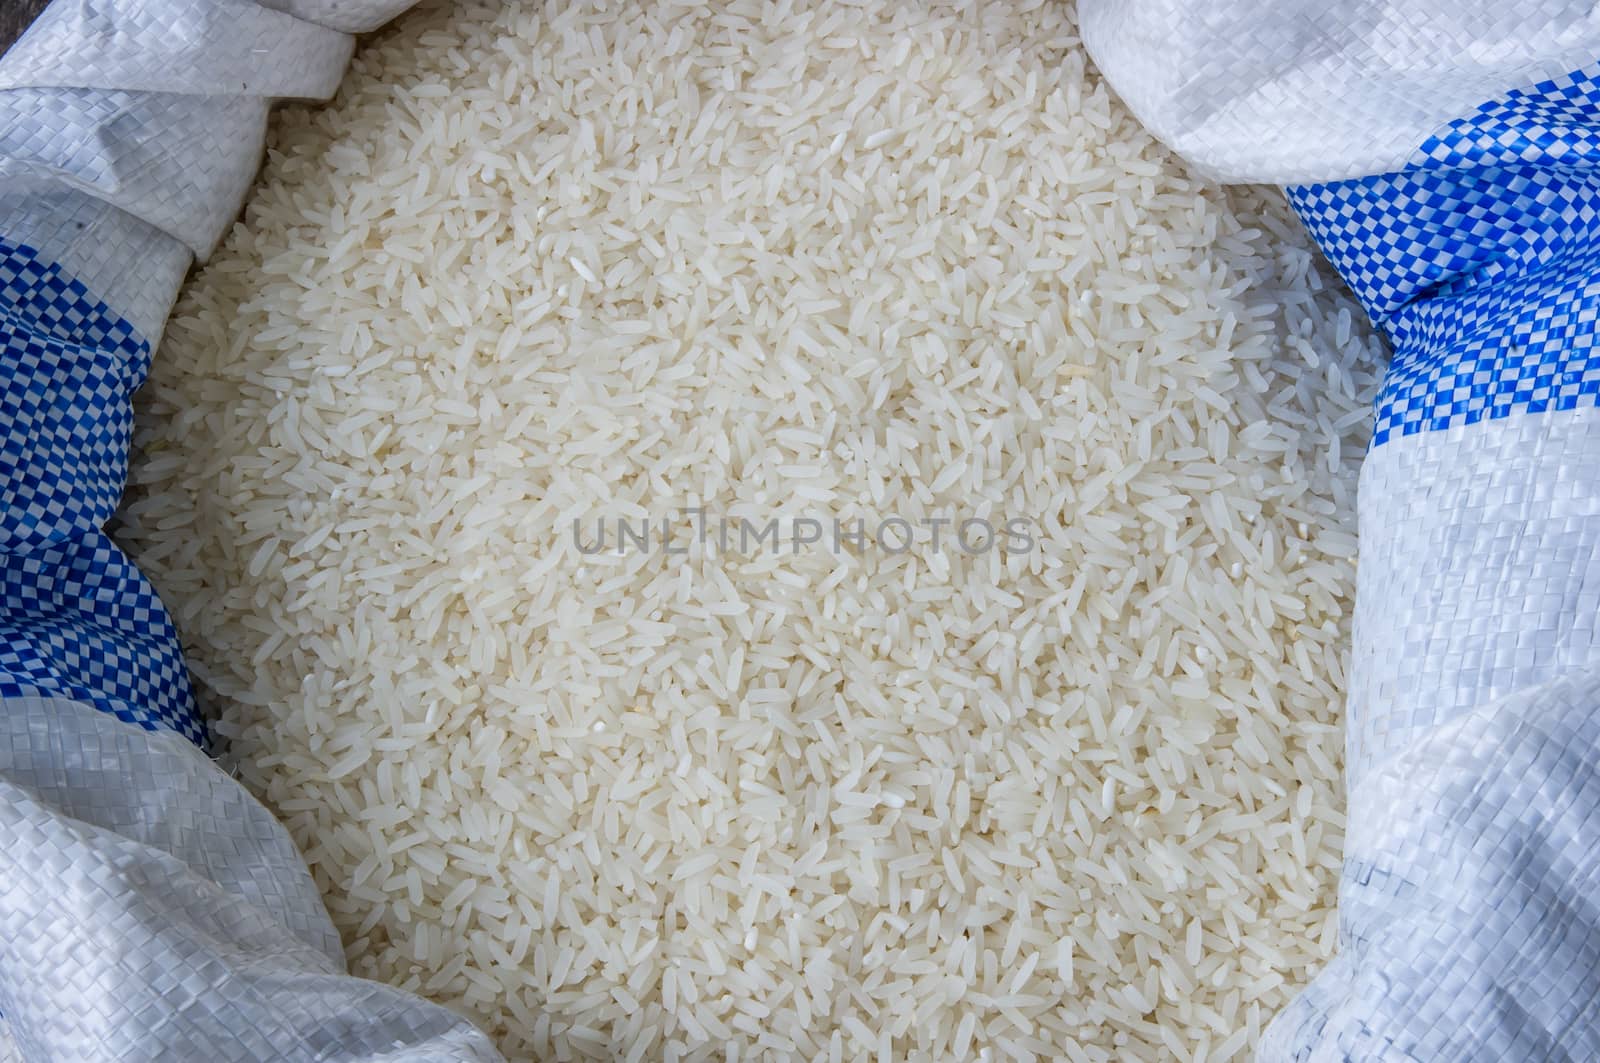 Uncooked jasmine rice in a bag.